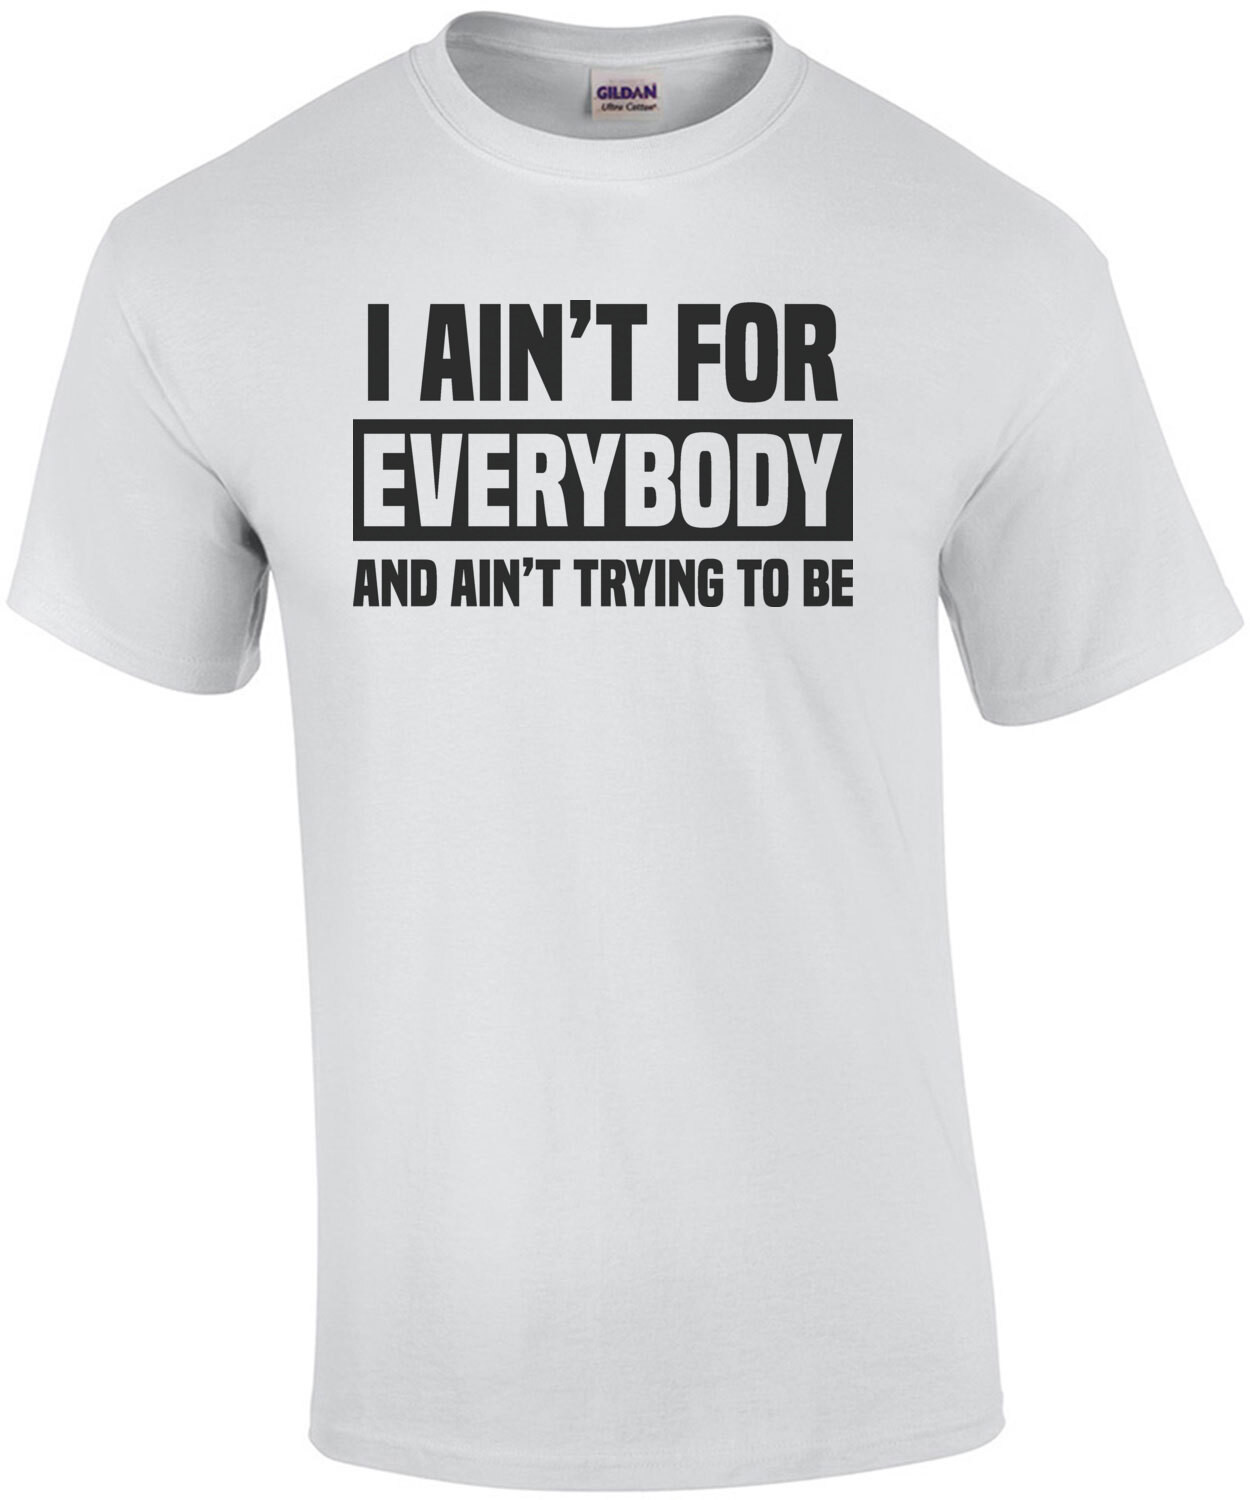 I ain't for everybody and ain't trying to be - funny t-shirt